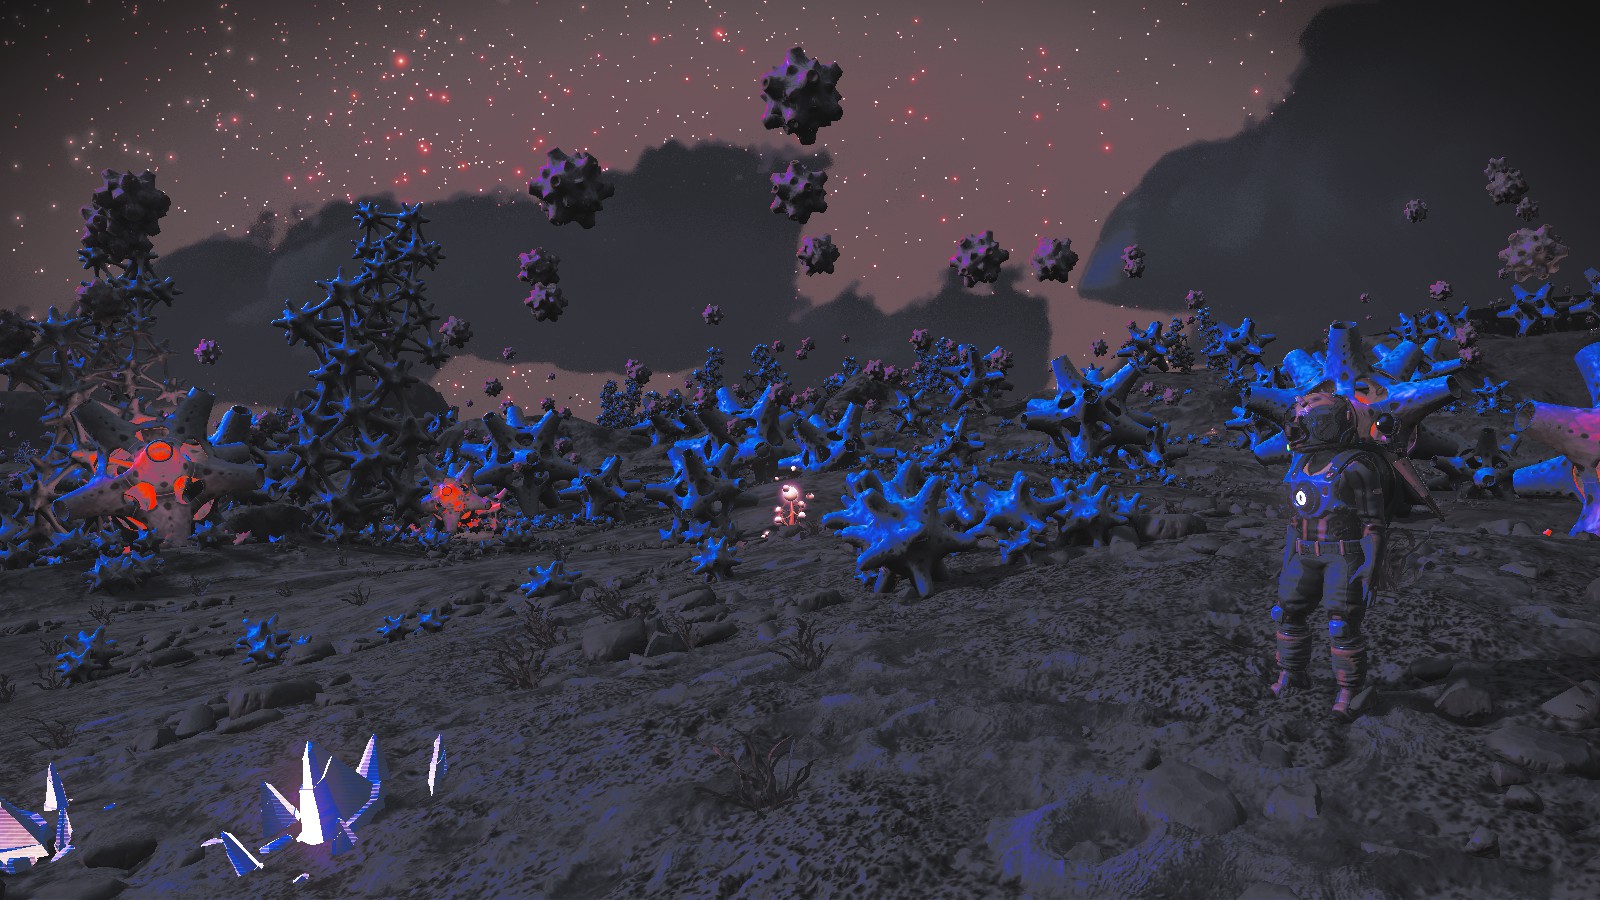 No Man's Sky, Expedition 6: Blighted, showing a planet with washed out lighting filled with weird gravity-defying caltrop-esque formations.  